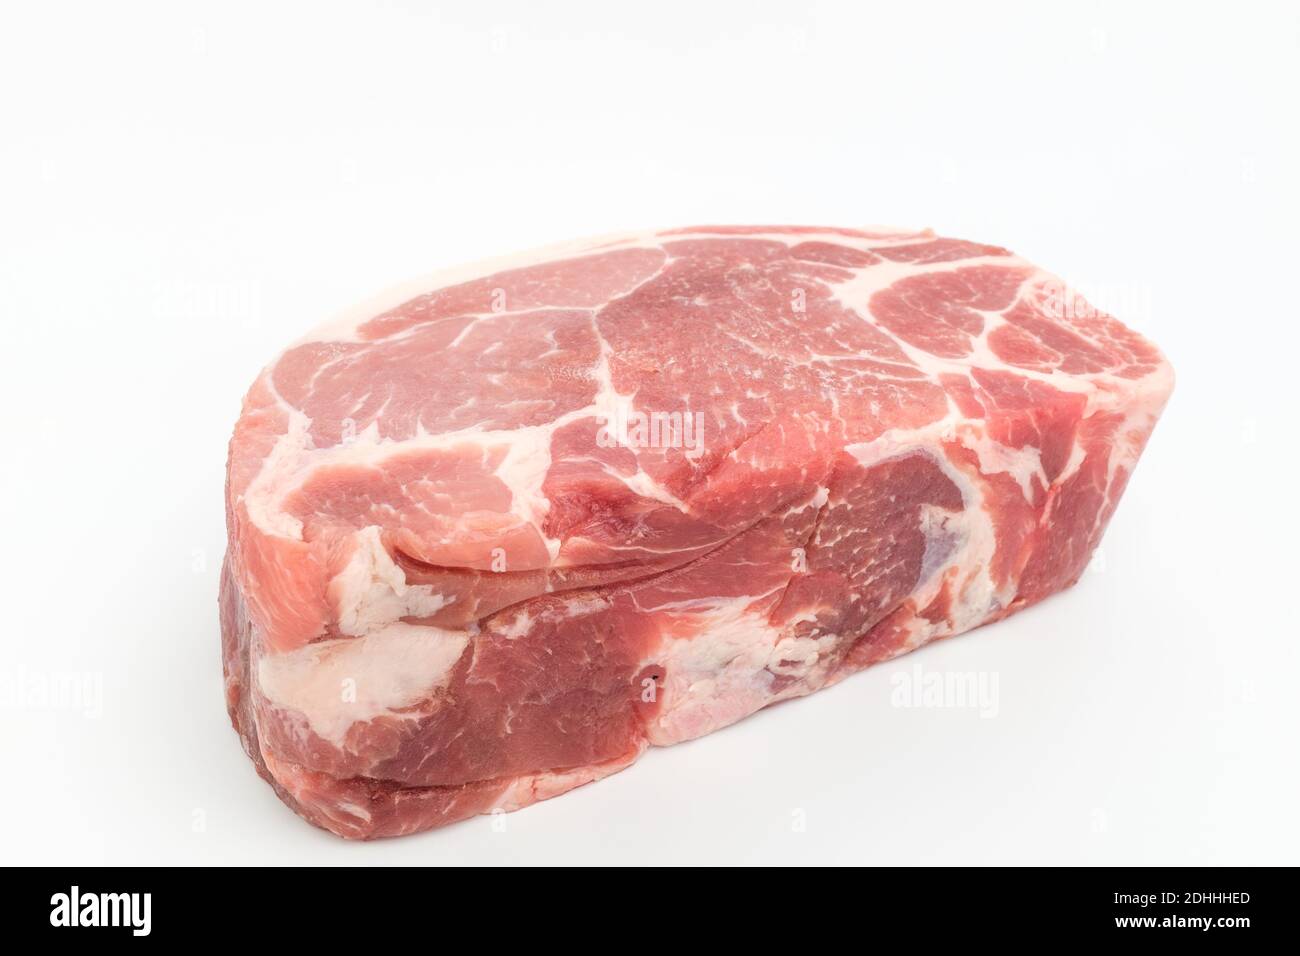 Pork neck. Pork leg. Thick meat. Red meat. Fresh meat Stock Photo